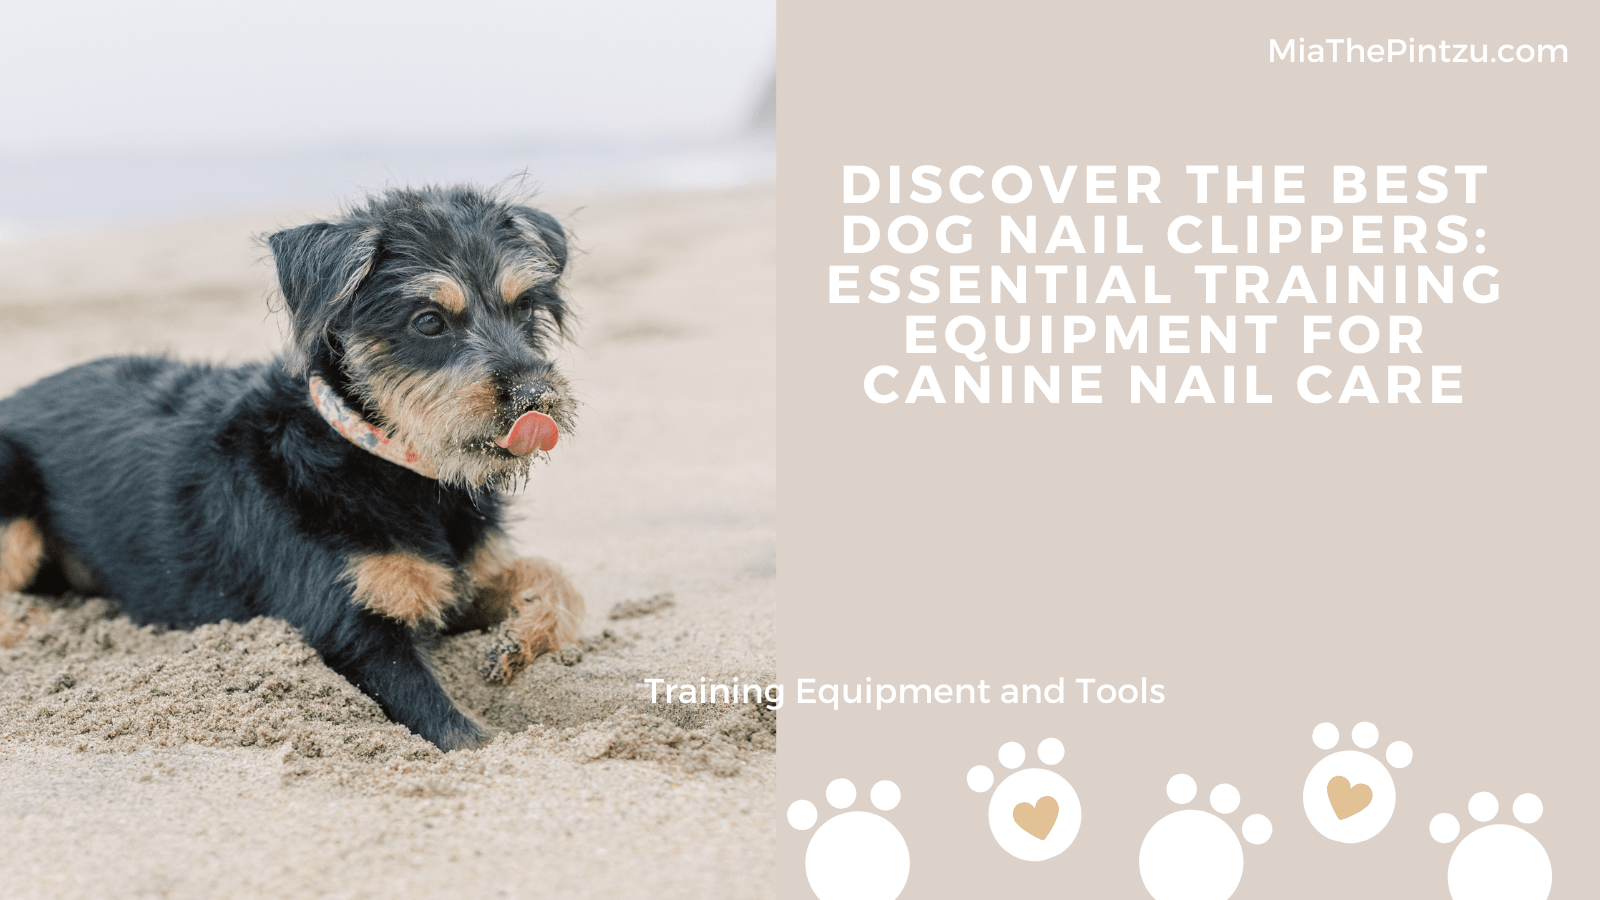 Discover the Best Dog Nail Clippers: Essential Training Equipment for Canine Nail Care